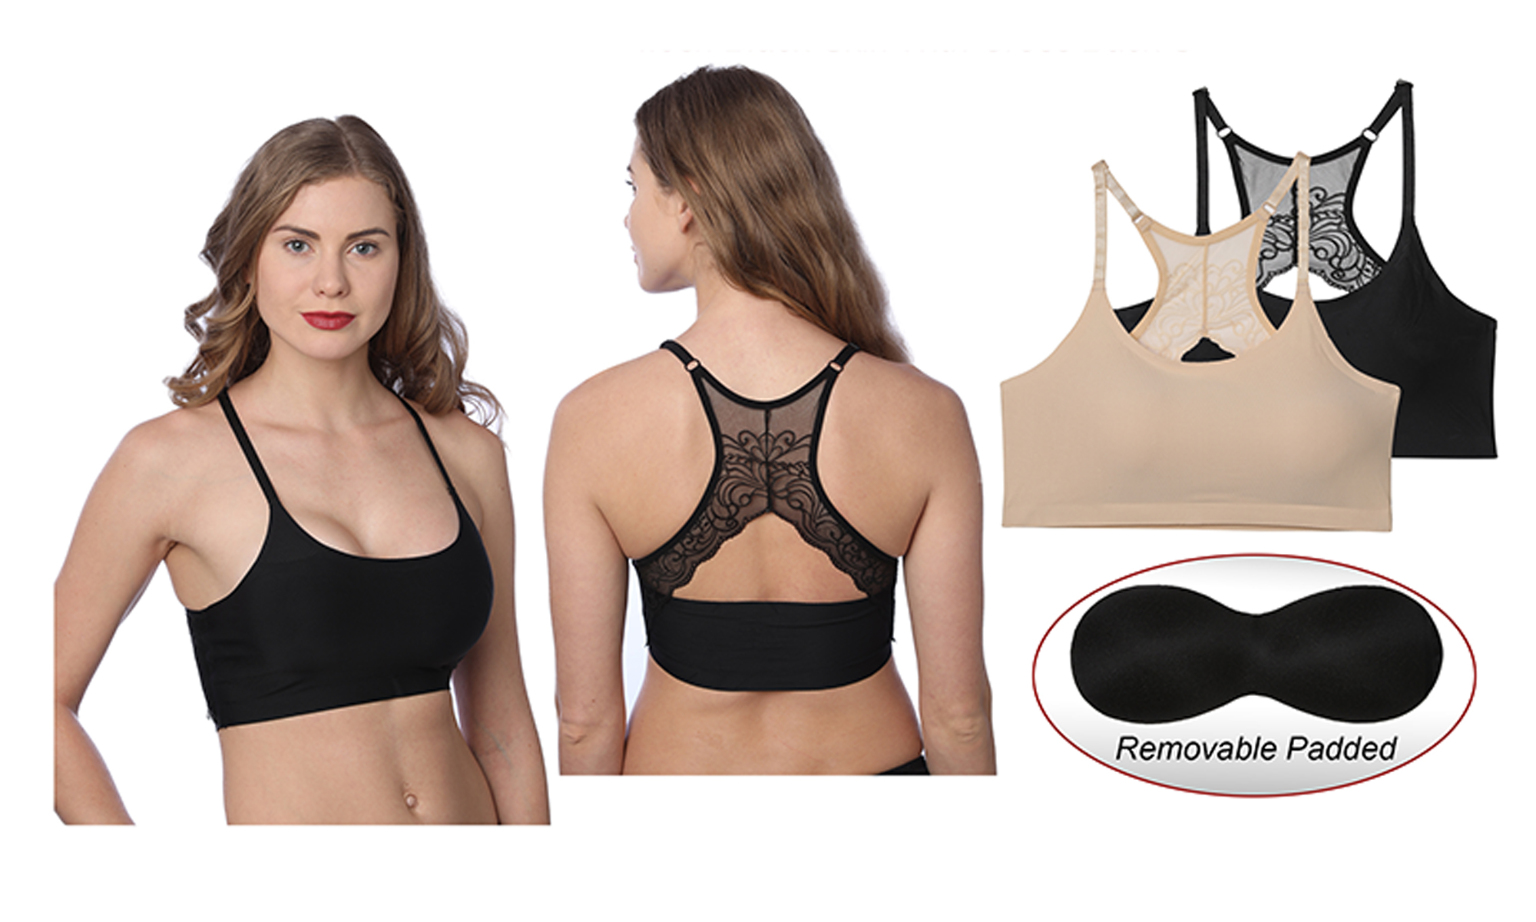 Women's Sports Bras - Assorted, Sizes M-XL, Removable Pads